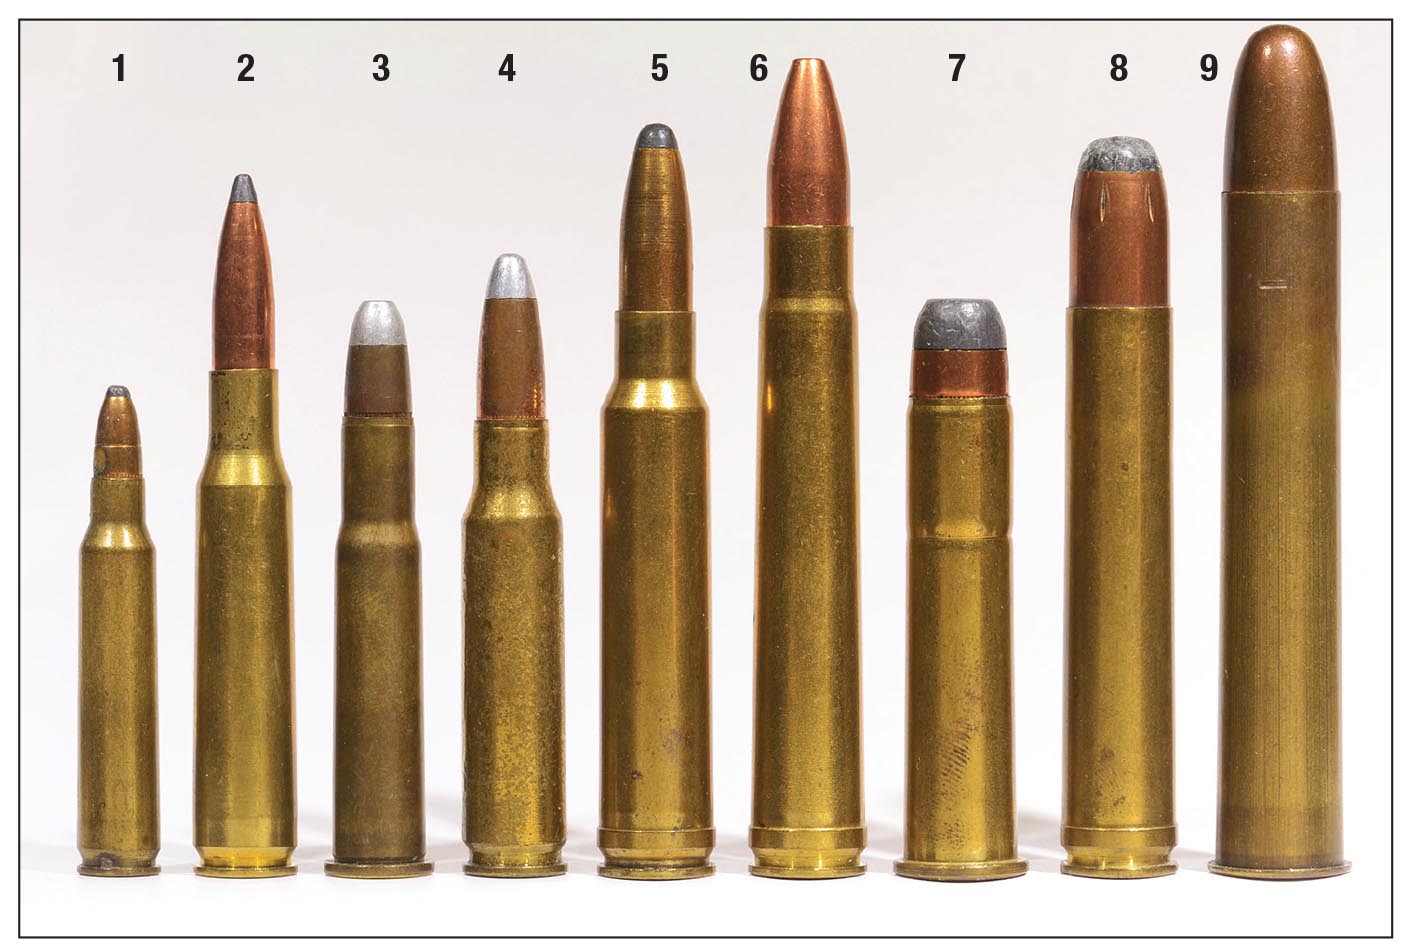 Just a few of the cartridges for which IMR-3031 can be used to good effect: (1) .223 Remington, (2) 7x57, (3) .30-30, (4) .308 Winchester, (5) .338 Winchester Magnum, (6) .375 H&H Magnum, (7) .45-70, (8) .458 Winchester Magnum and (9) .500 Nitro Express (3 inch).